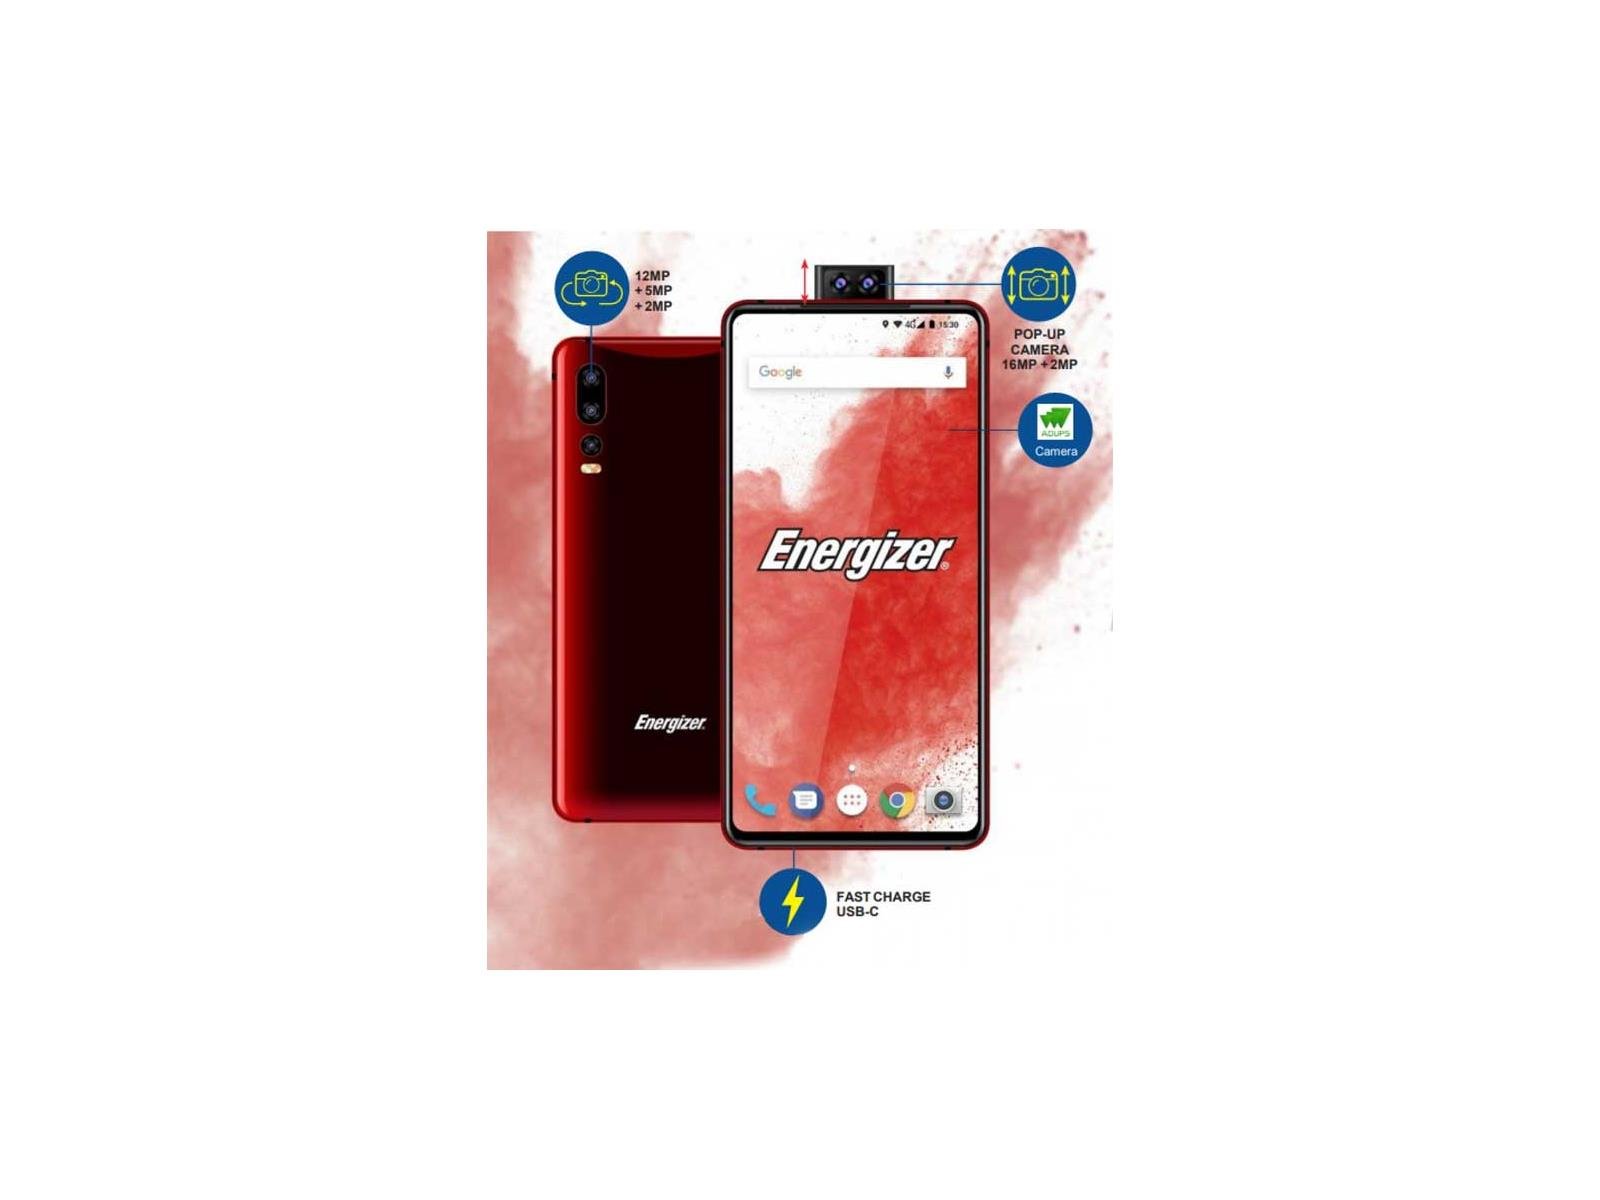 Energizer Bunny Hops Into MWC With mAh Phones Pop-Up Selfie Cams | HotHardware